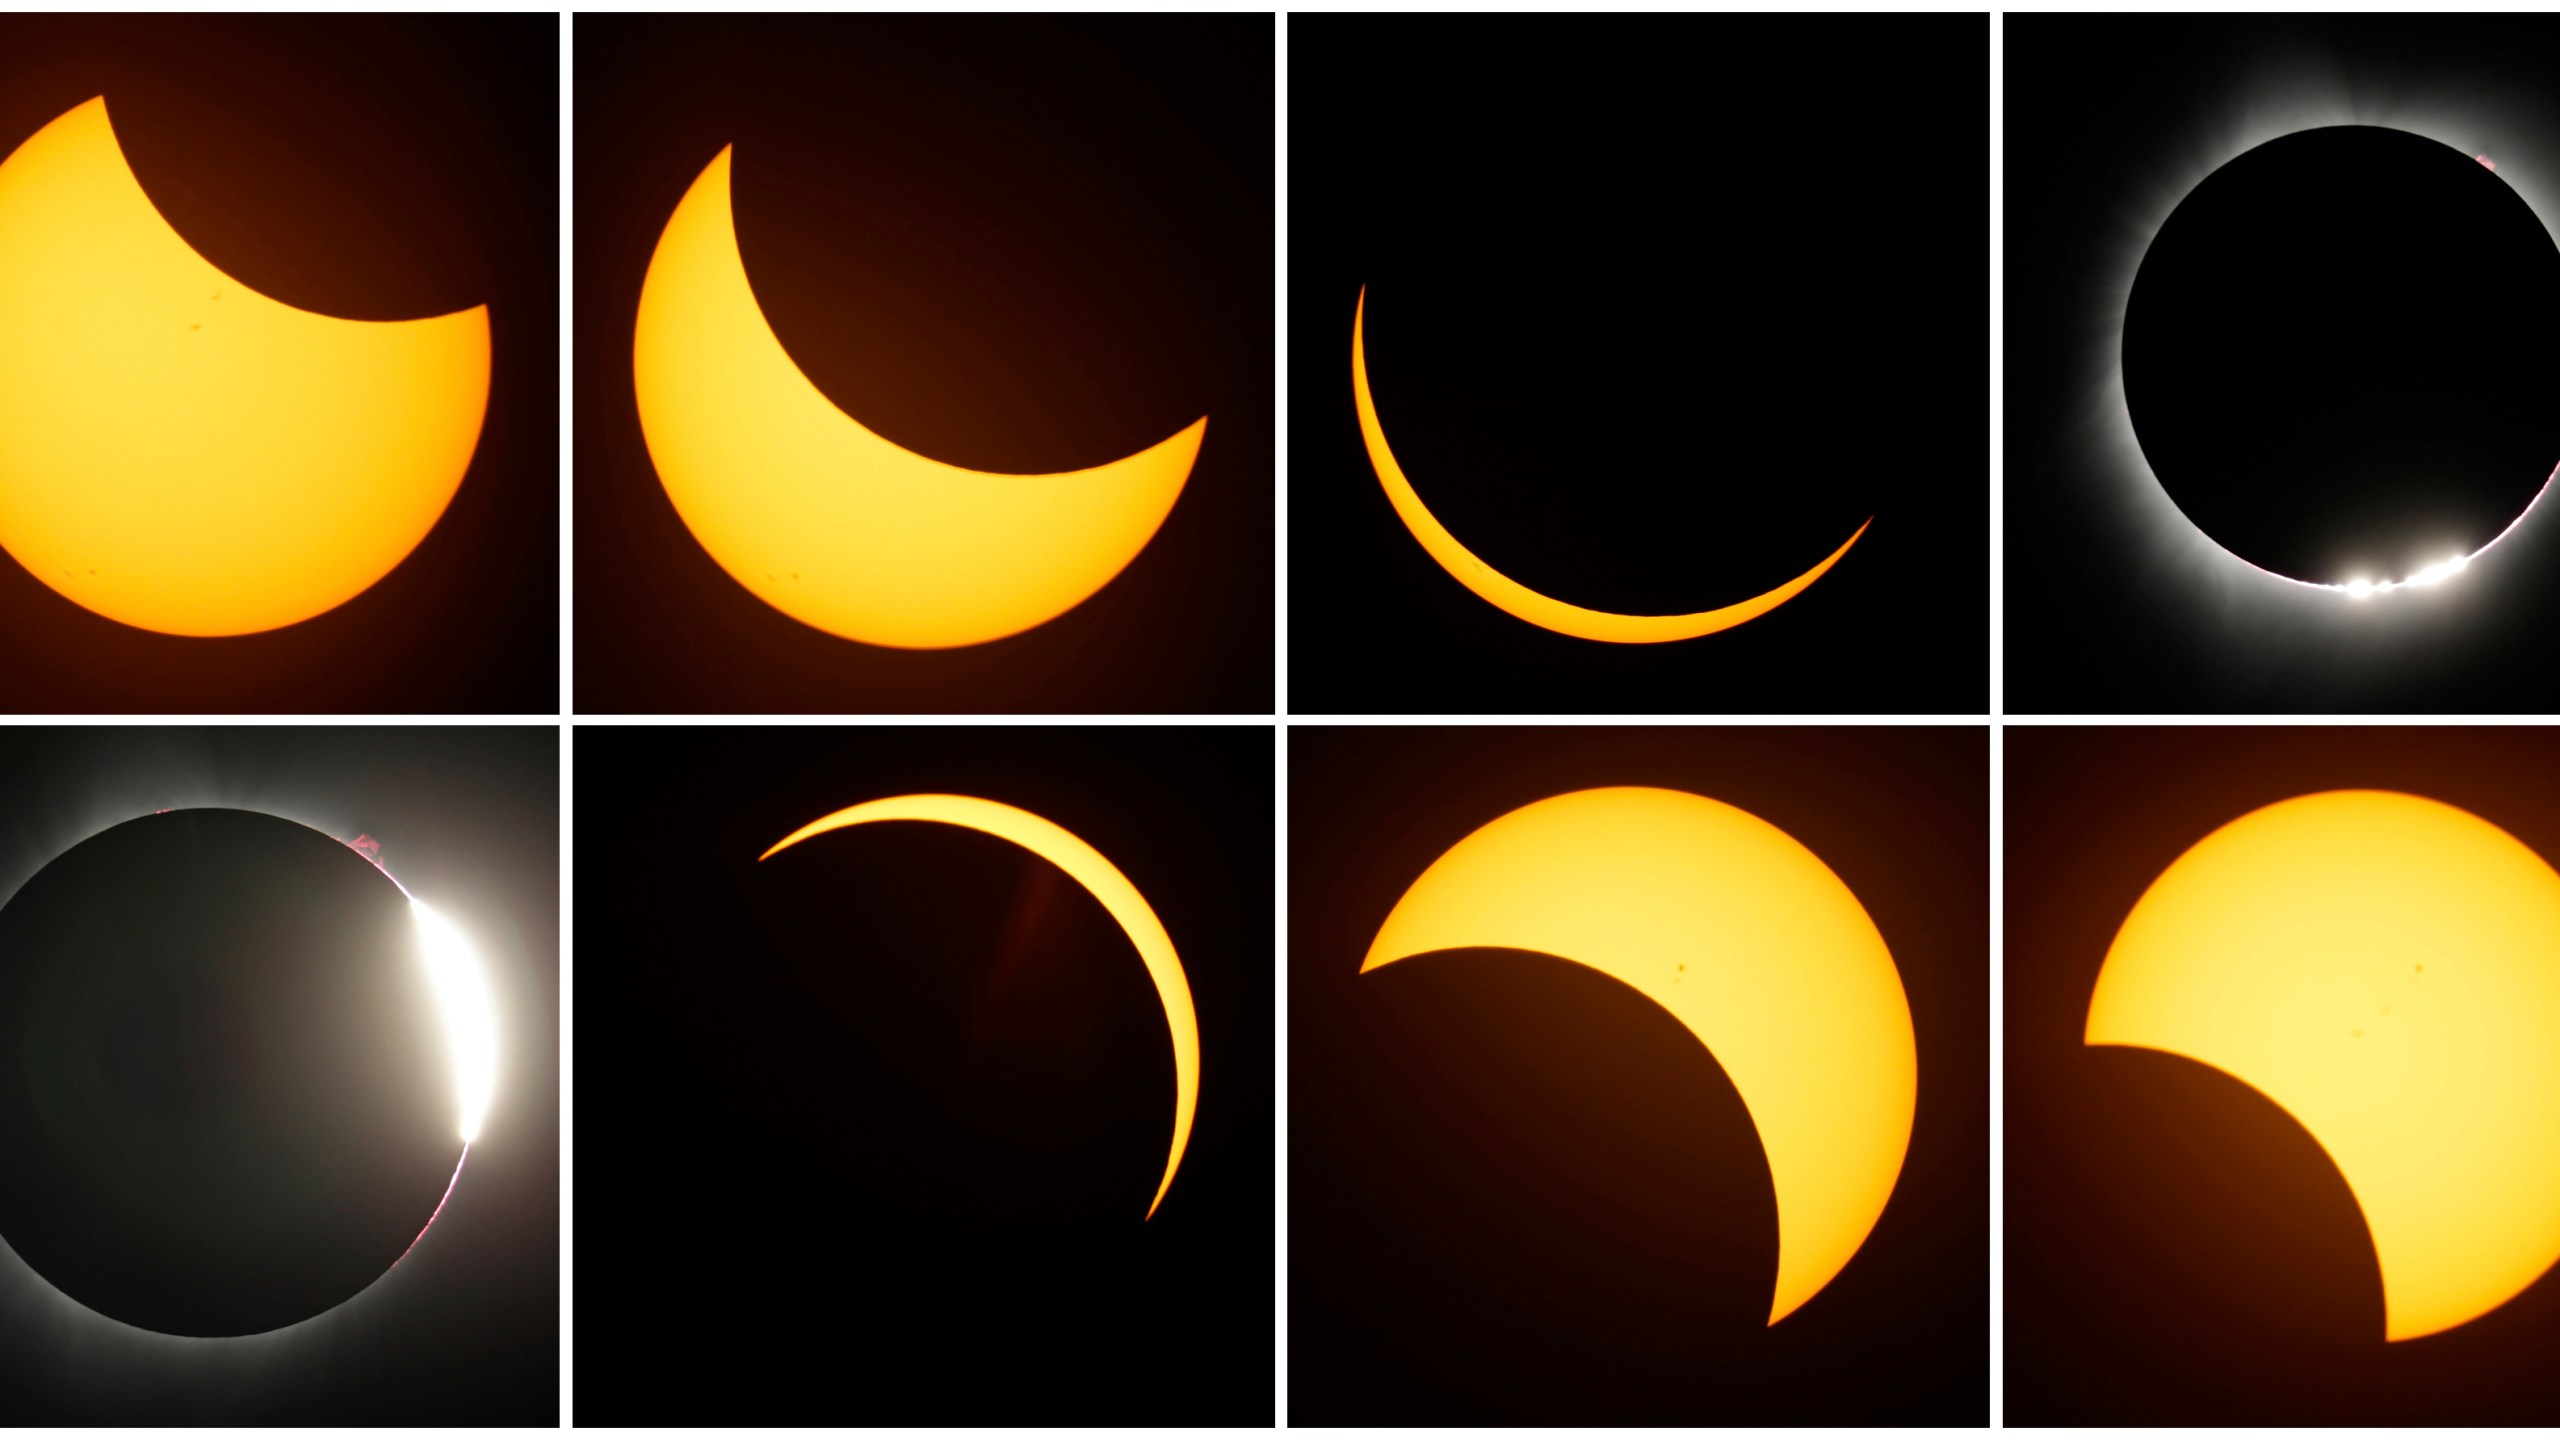 FILE - This combination of photos shows the path of the sun during a total eclipse by the moon Monday, Aug. 21, 2017, near Redmond, Ore. On April 8, 2024, spectators who aren't near the path of totality or who get cloudy weather on eclipse day can still catch the total solar eclipse, with NASA, science centers and media organizations planning to stream live coverage online from different locations along the path. (AP Photo/Ted S. Warren, File)